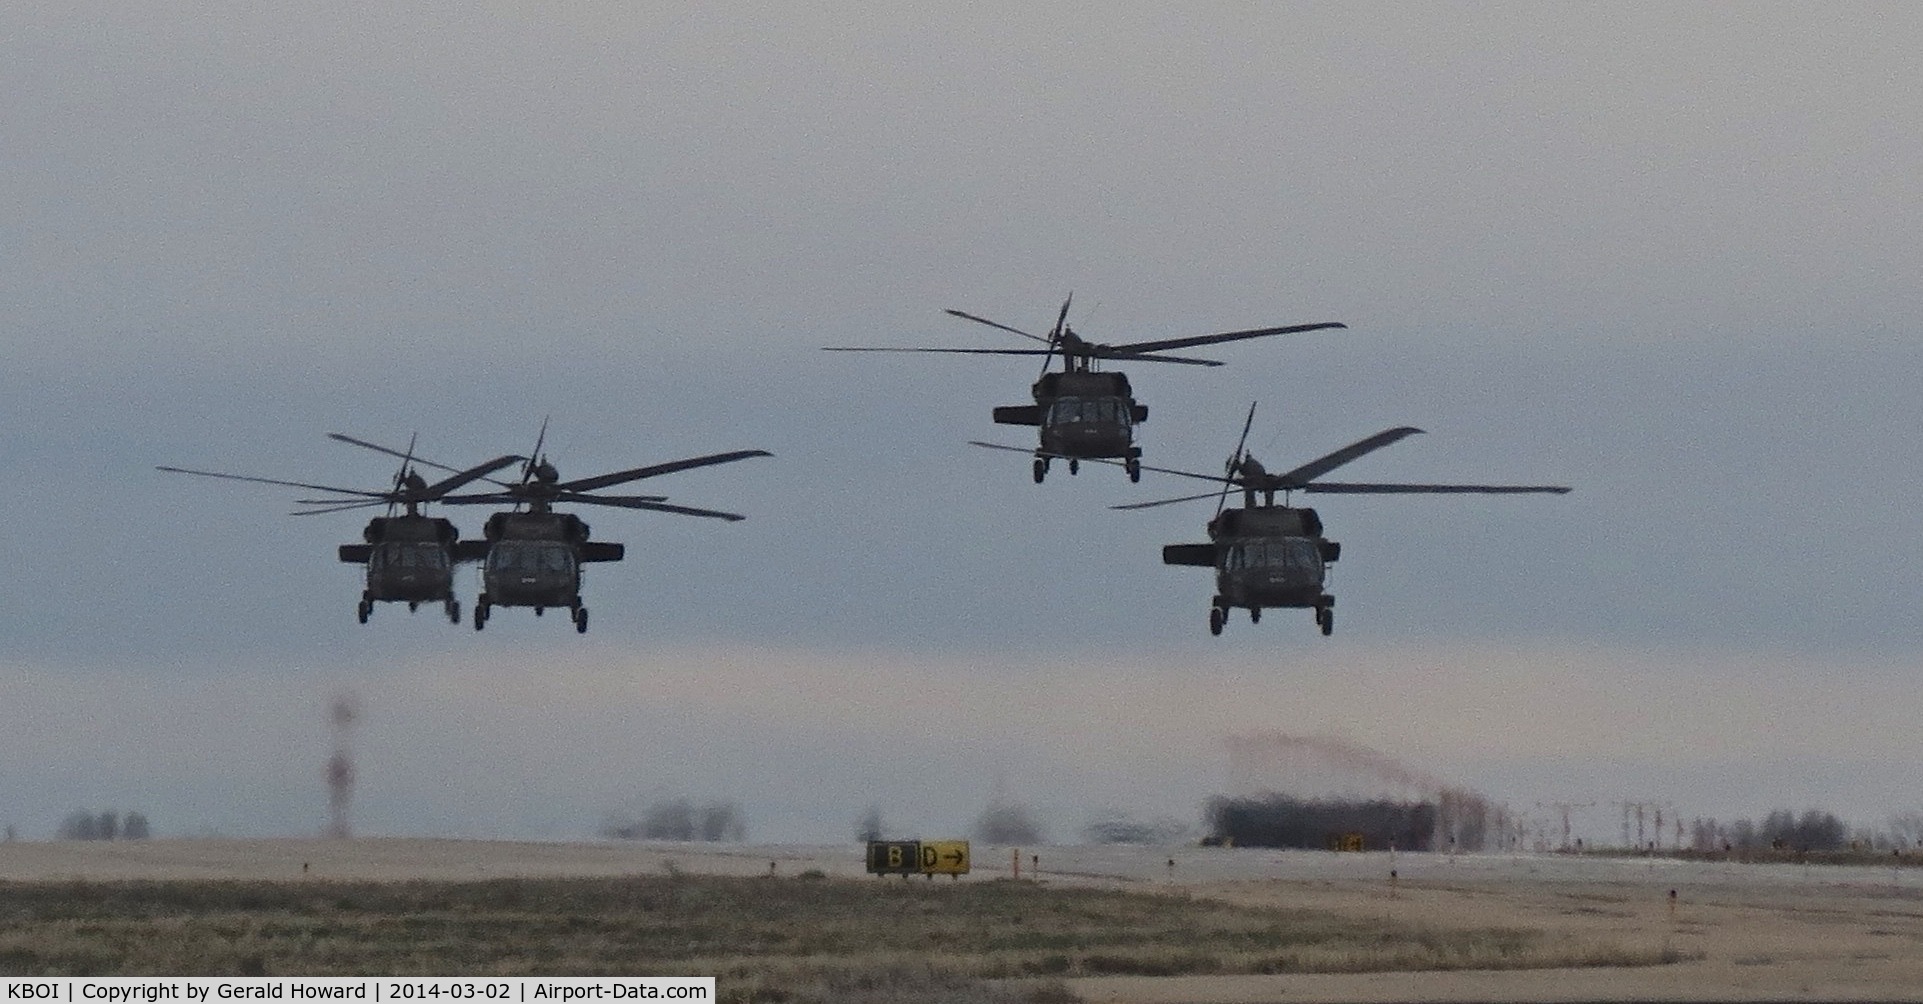 Boise Air Terminal/gowen Fld Airport (BOI) - UH-60s from the 1-183rd AVN BN, Idaho Army National Guard departing Bravo.
